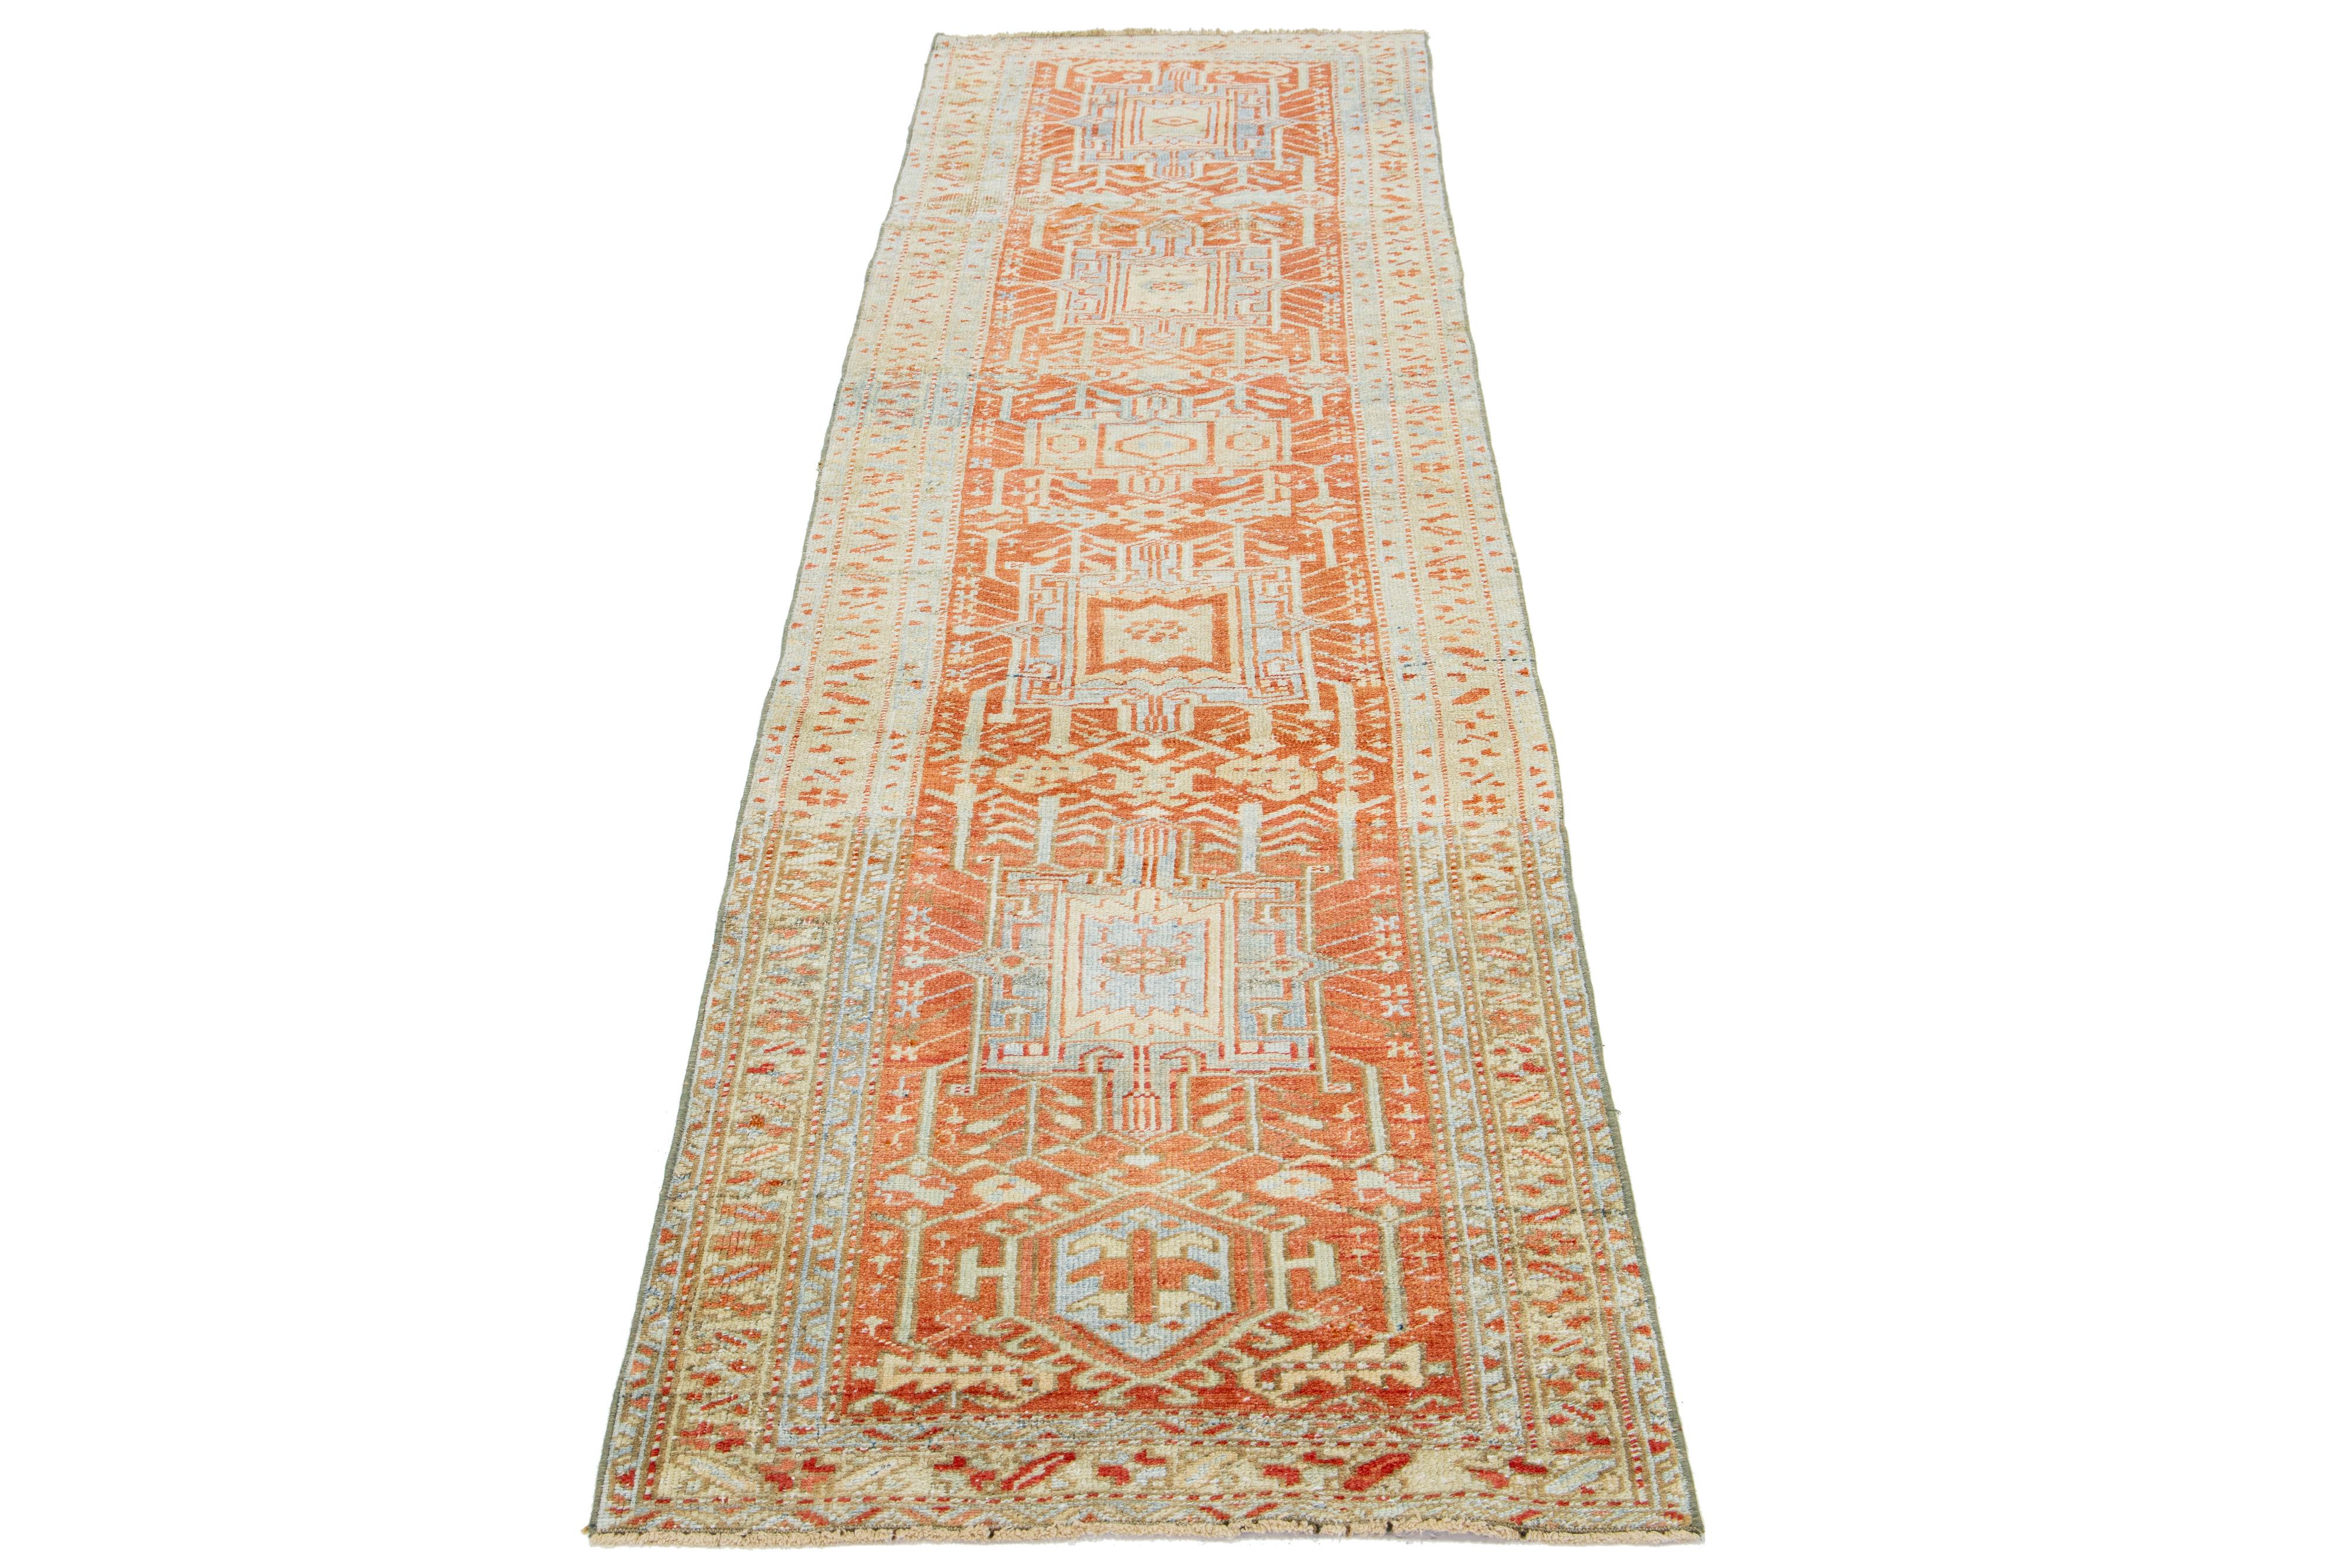 This beautiful Heriz hand-knotted wool runner from the 20th century features an orange rust field. The piece showcases stunning blue, tan, and brown accents in an exquisite tribal geometric design.

This rug measures 2'8